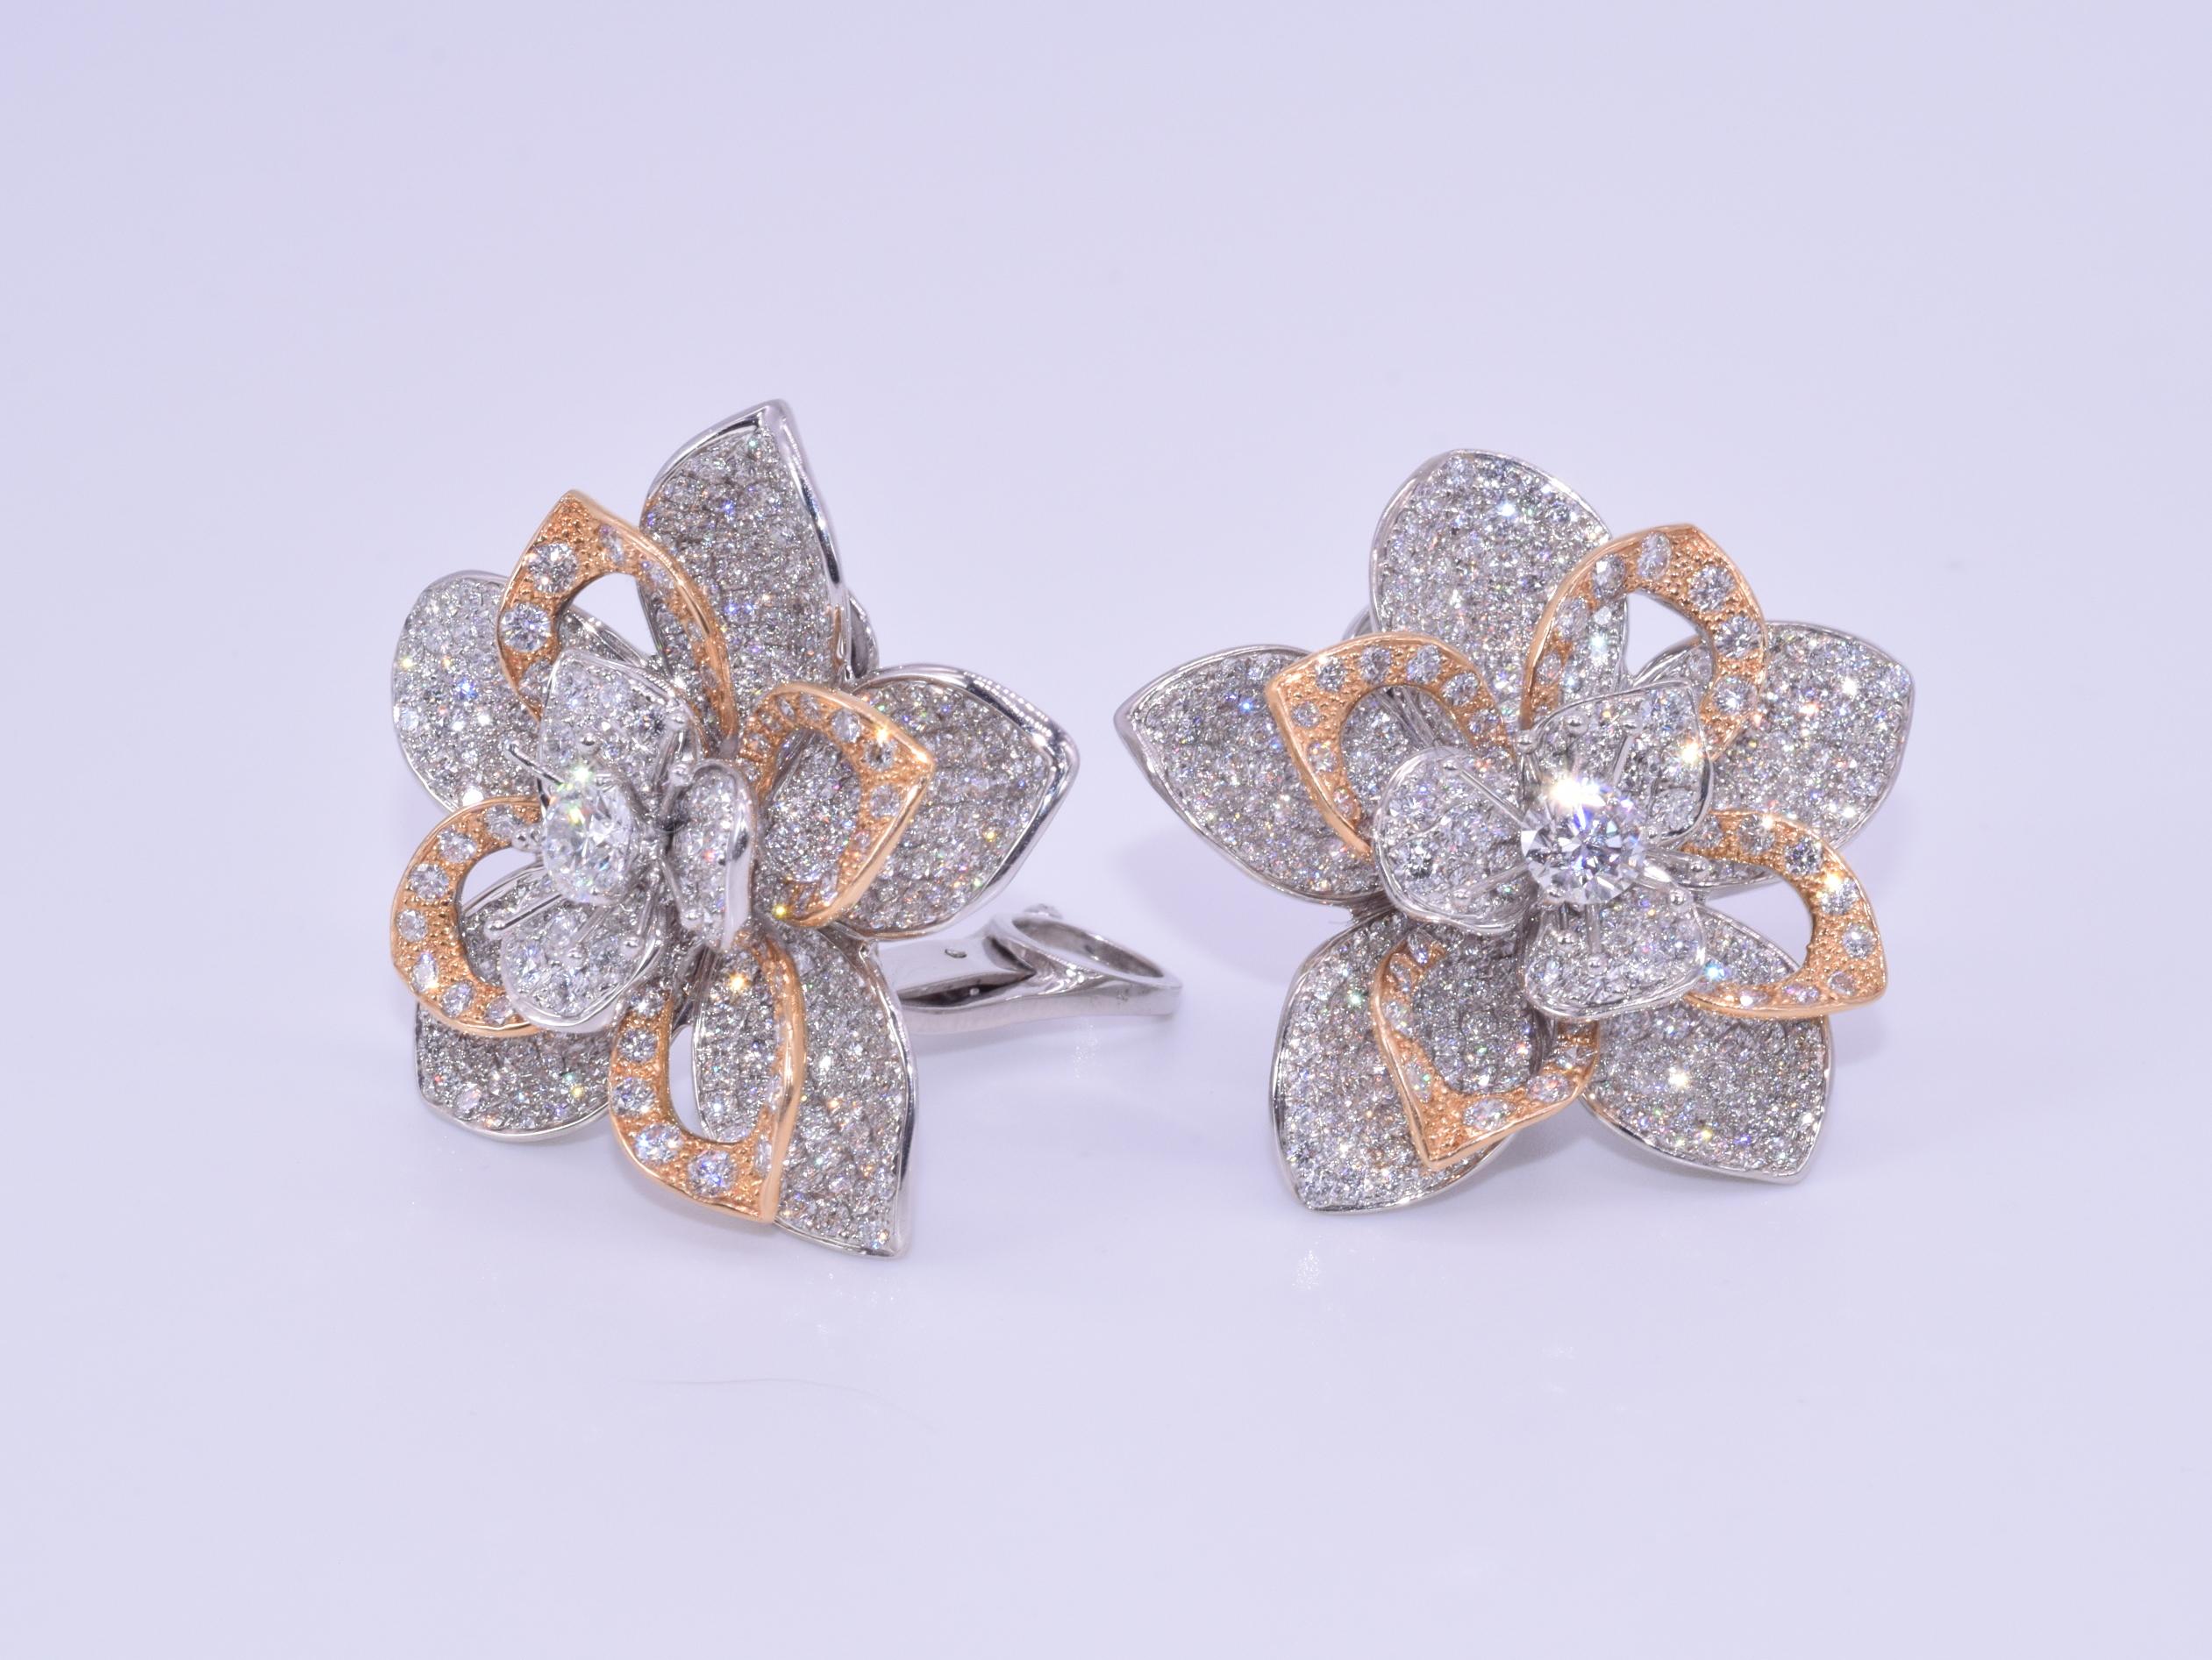 Contemporary Kwiat Diamond Flower Earrings from the Lotus Collection 18k White and Rose Gold